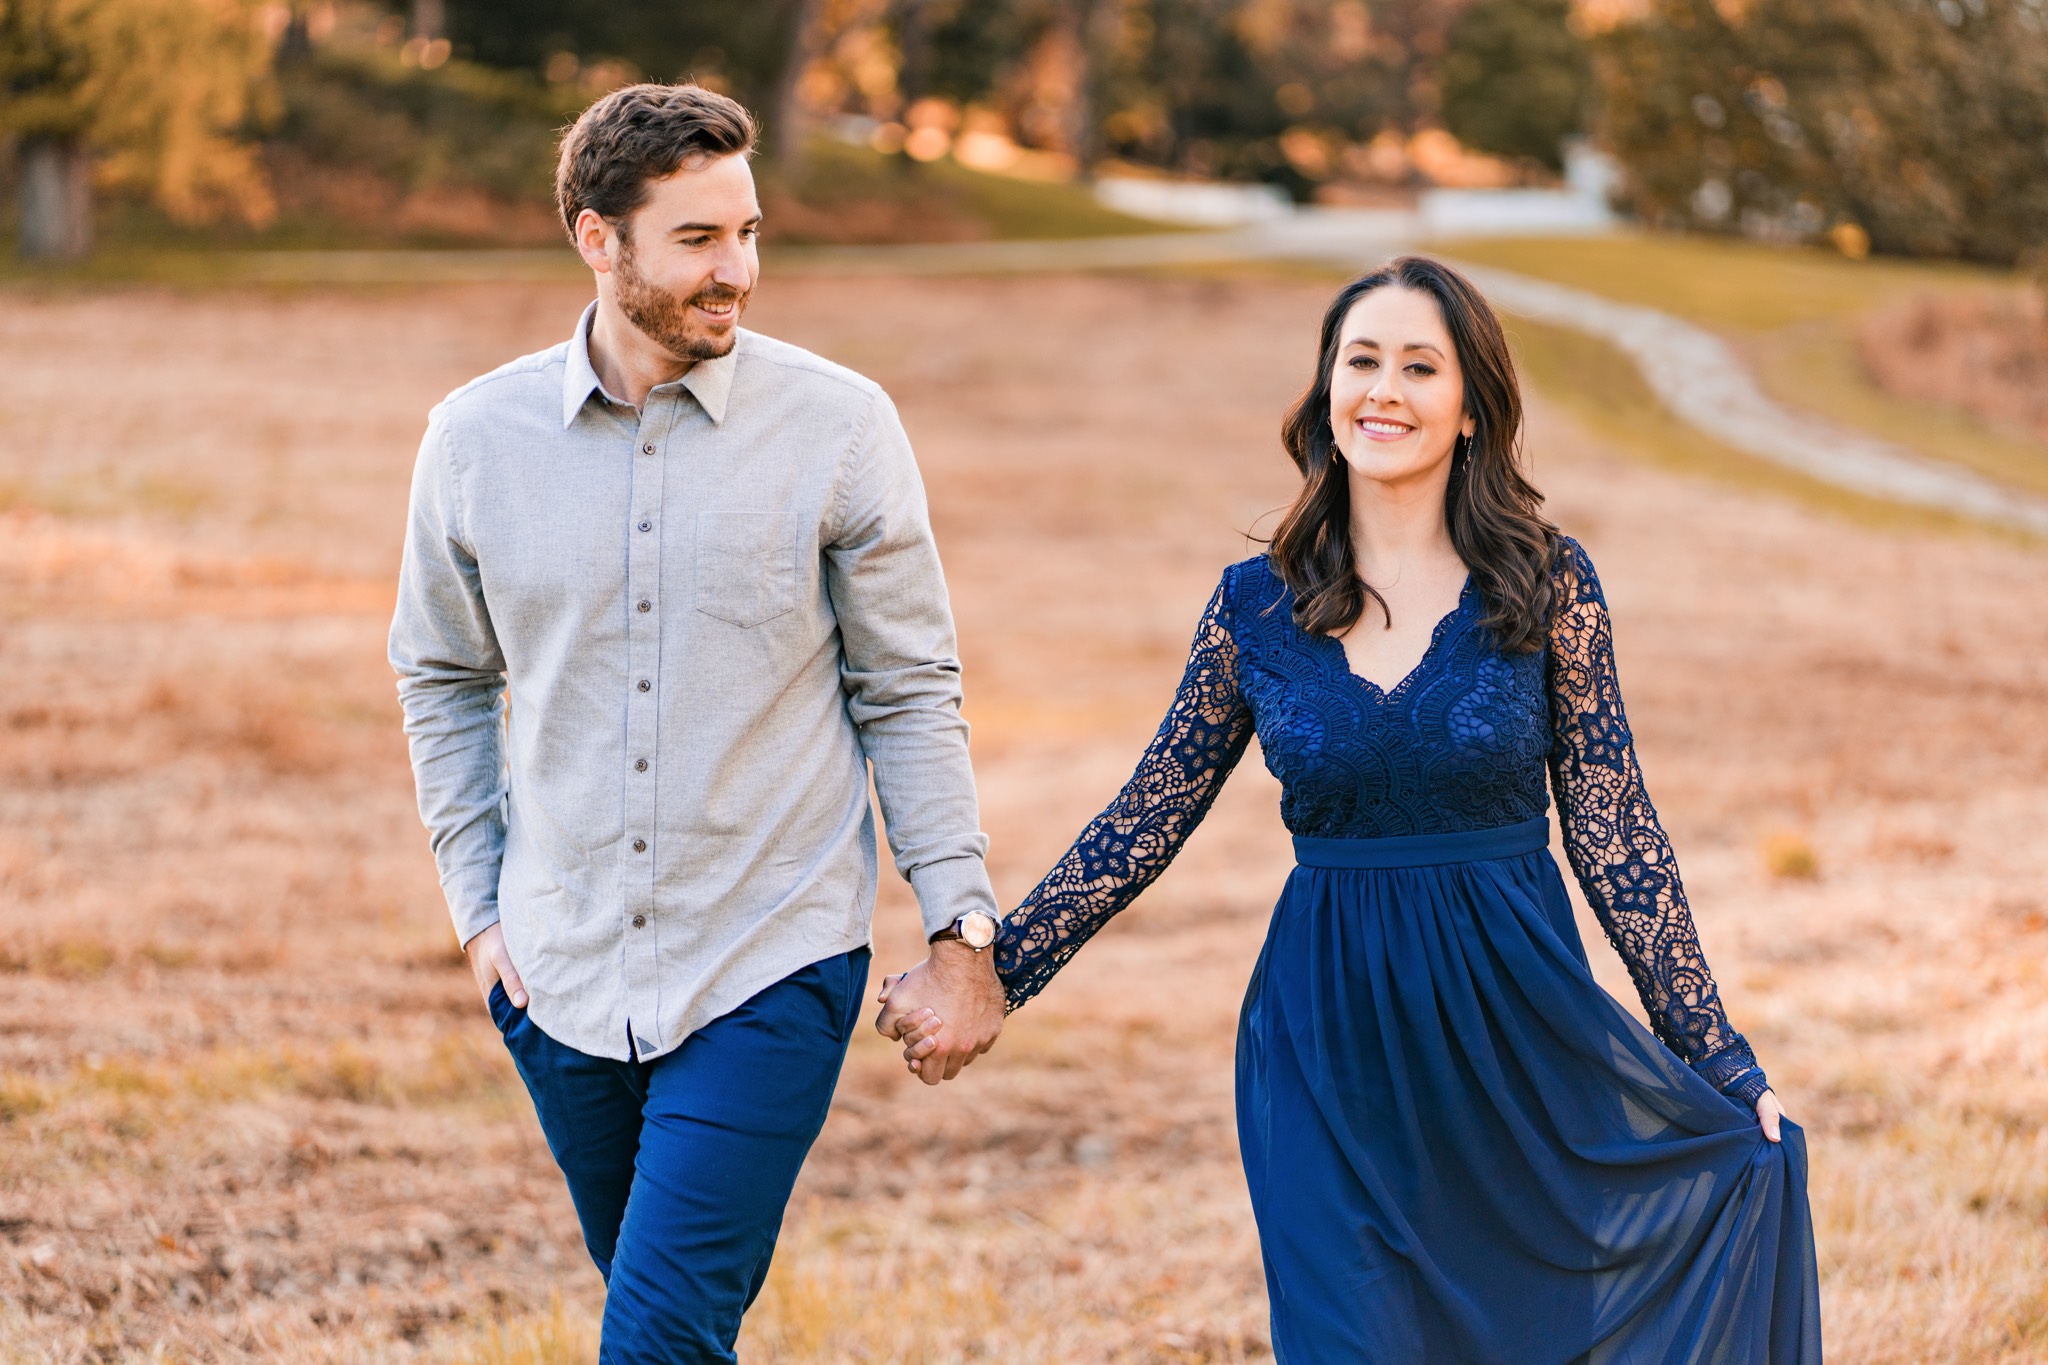 Matt & Molly's Colorful Fall Engagement at Valley Forge Park